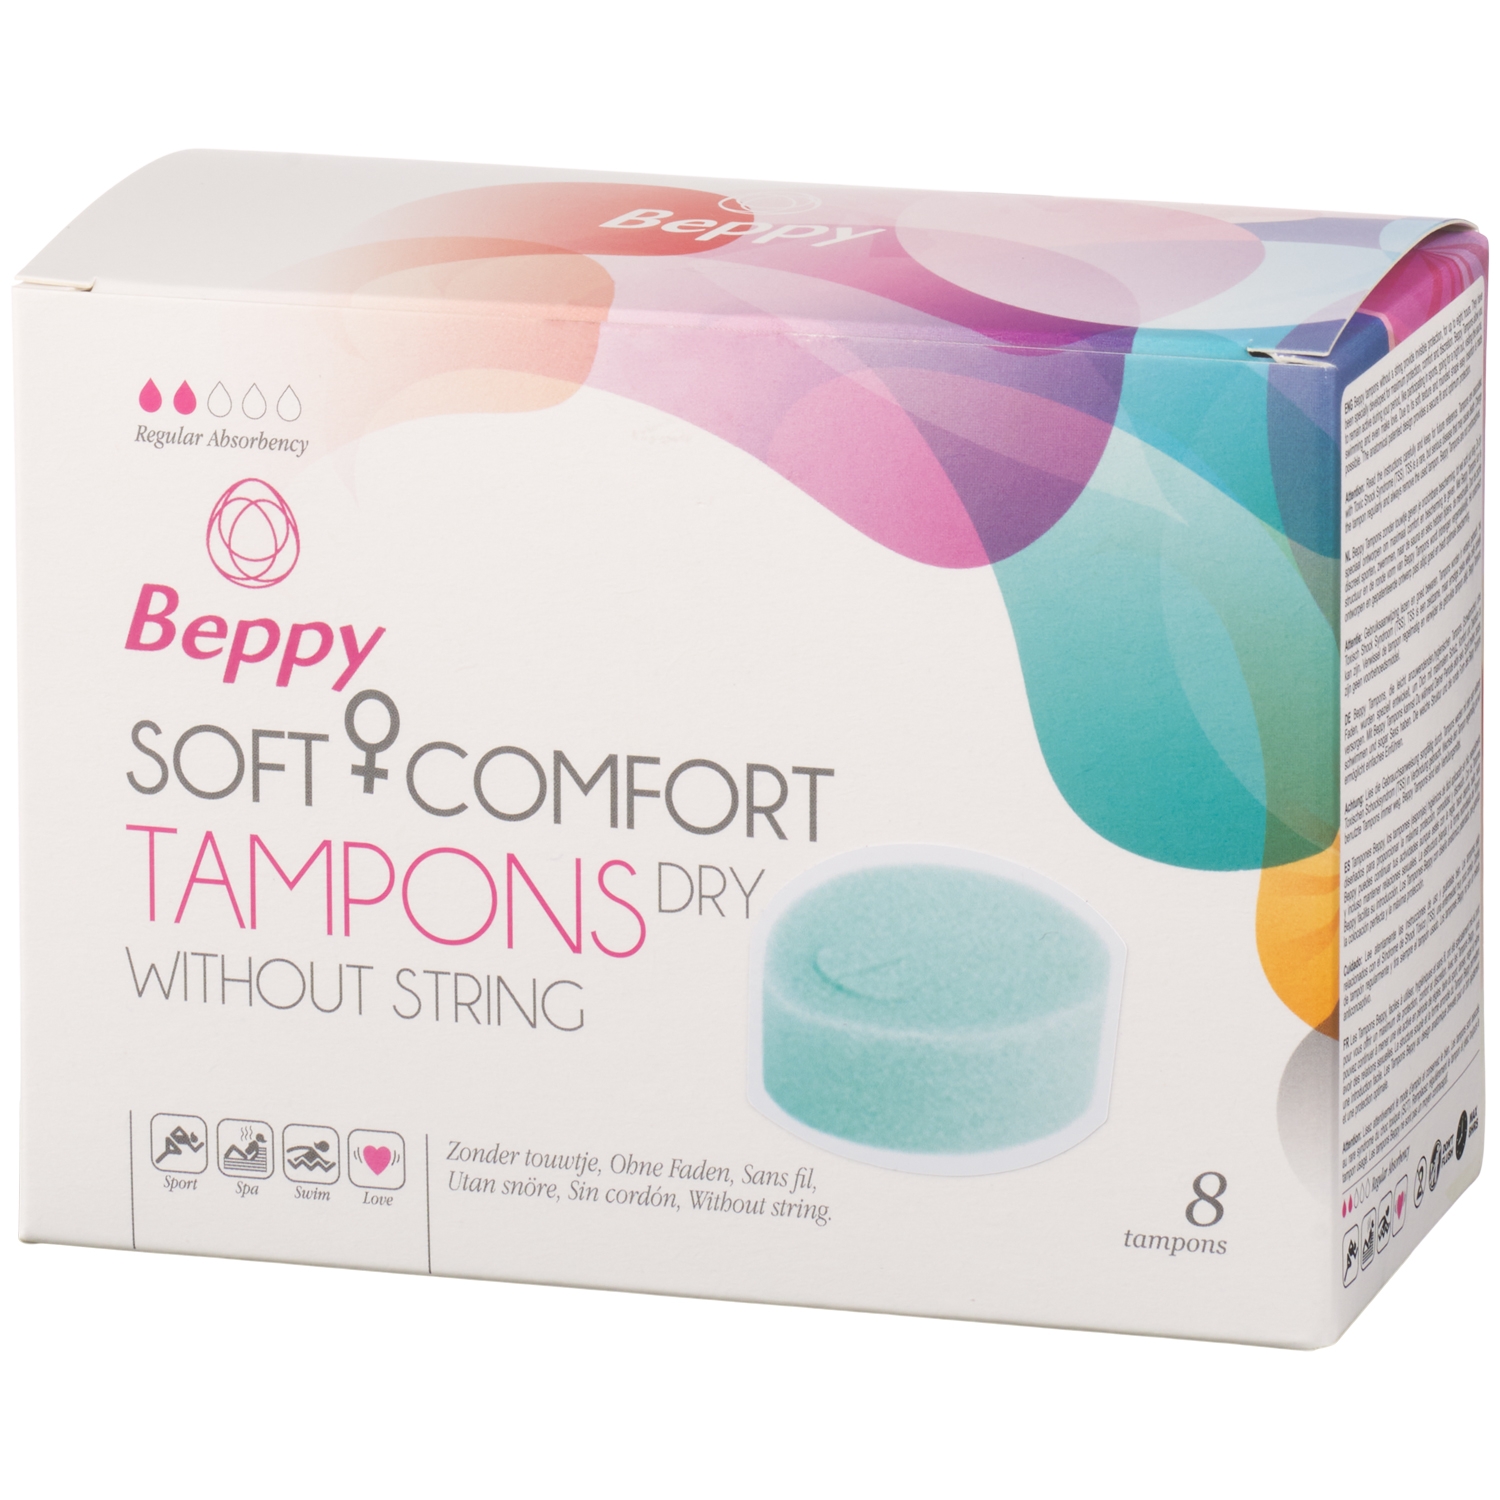 Beppy Soft + Comfort Tampons Dry 8 pcs - Blue thumbnail